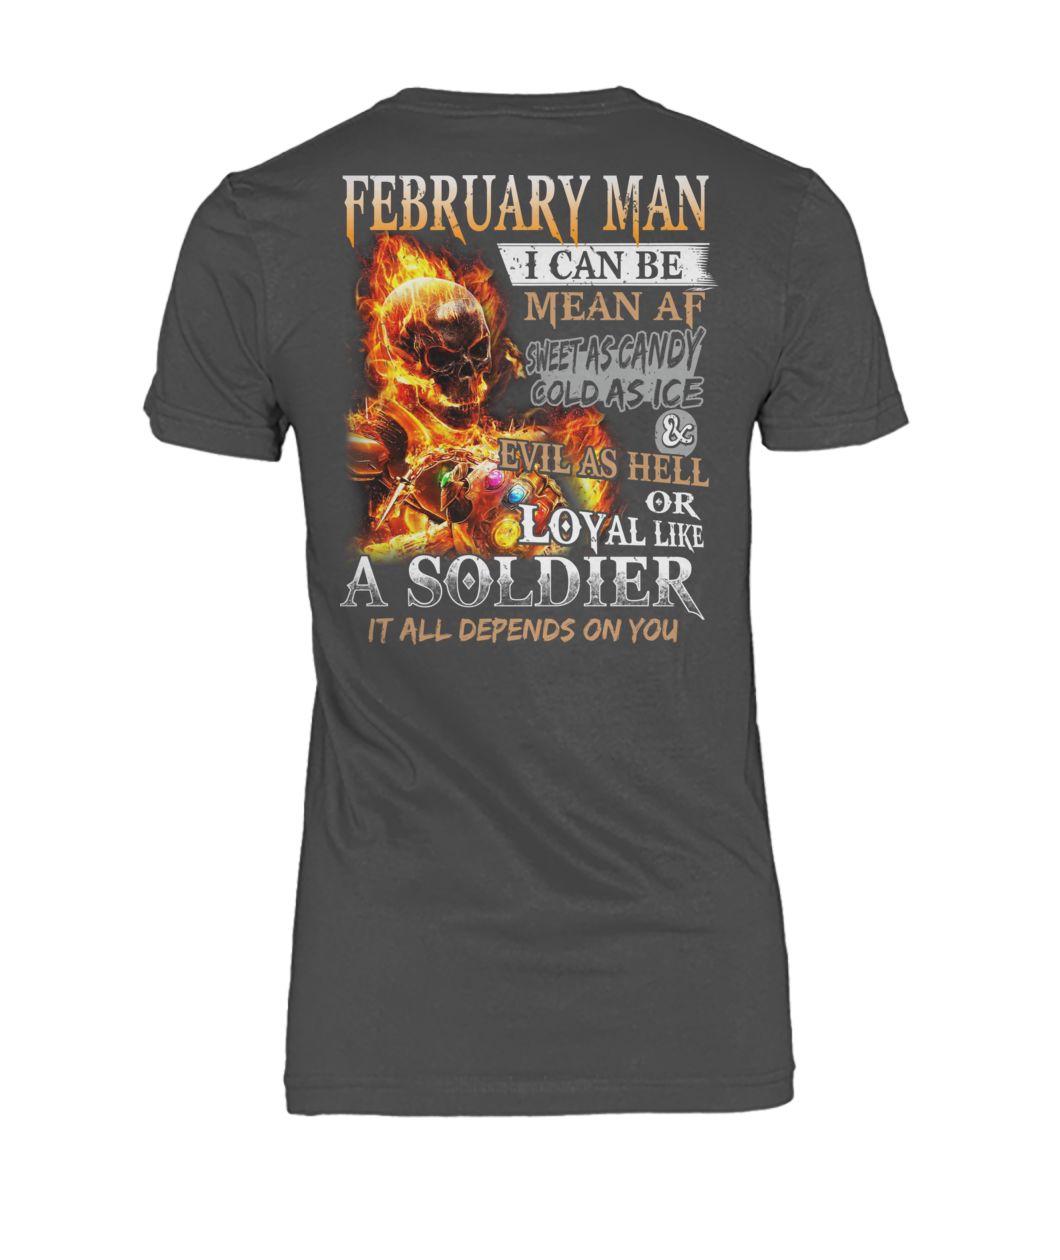 February man I can be mean af sweet as candy gold as ice and evil as hell women's crew tee